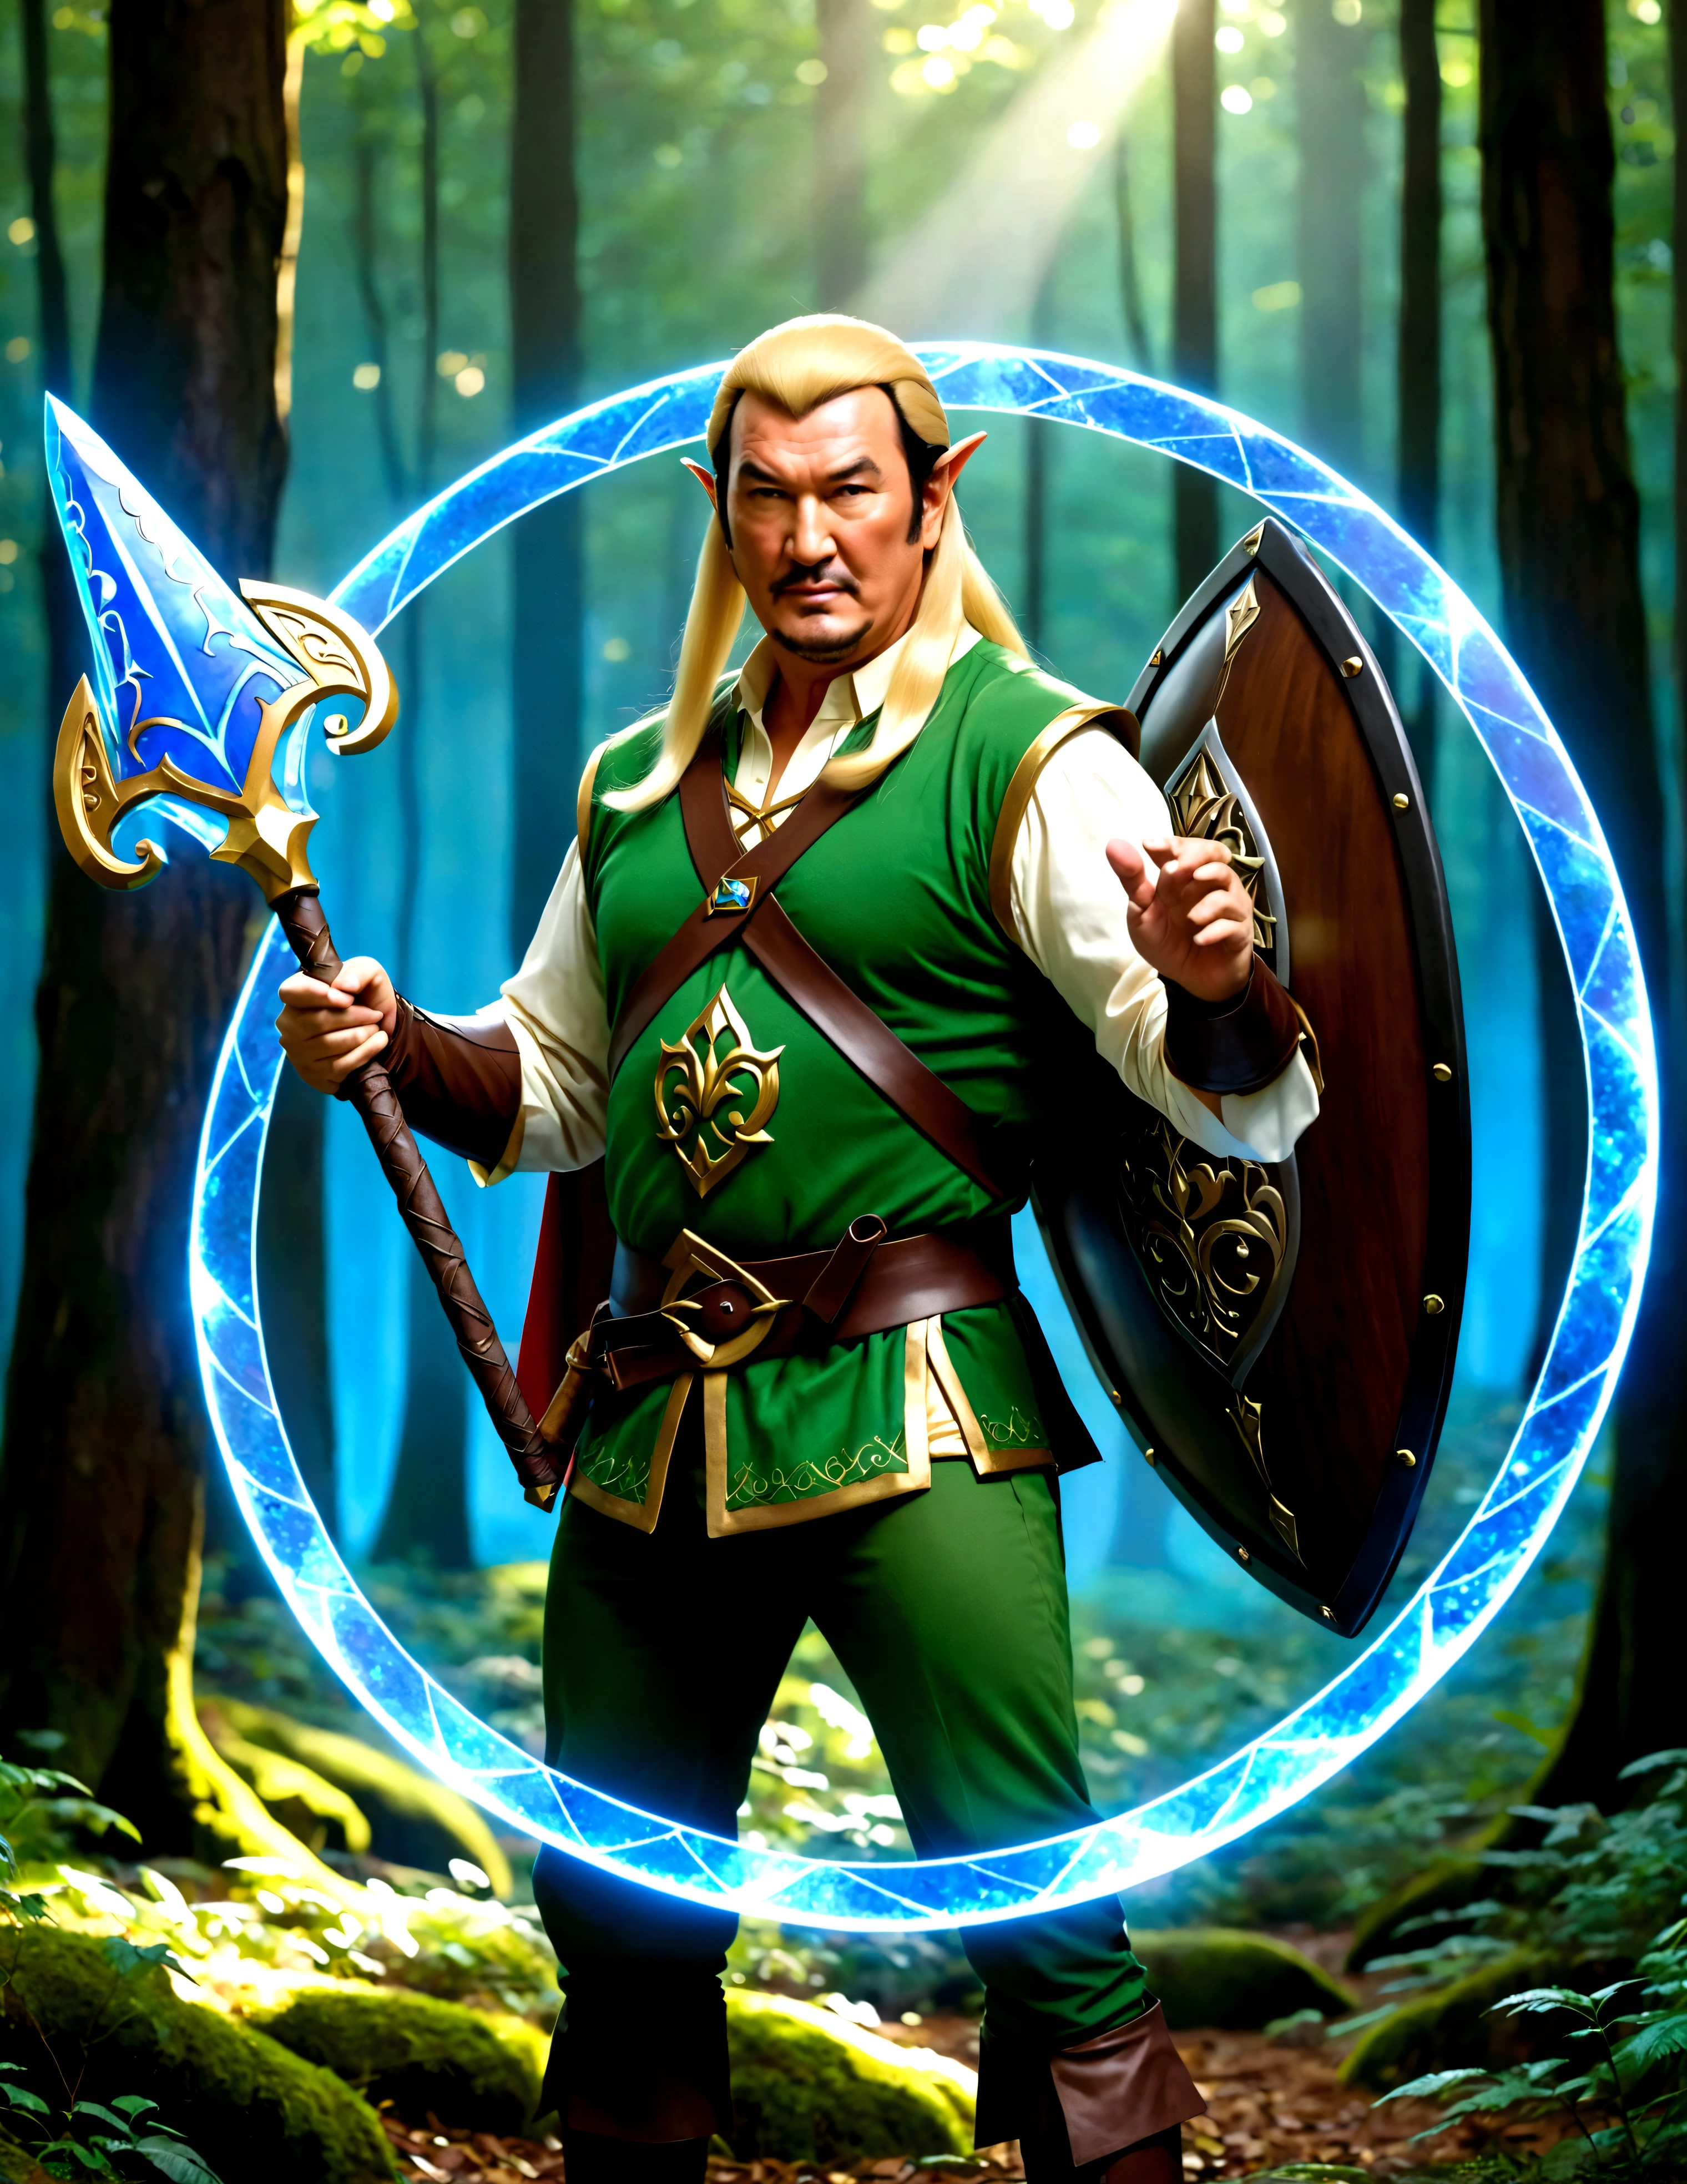 Steven Seagal (current, modern, big belly) in the role of Link (Link costume, elf ears, blonde wig over black hair, Link's shield on arm), akido pose, forest. Small magic fairy hovers nearby blue aura
